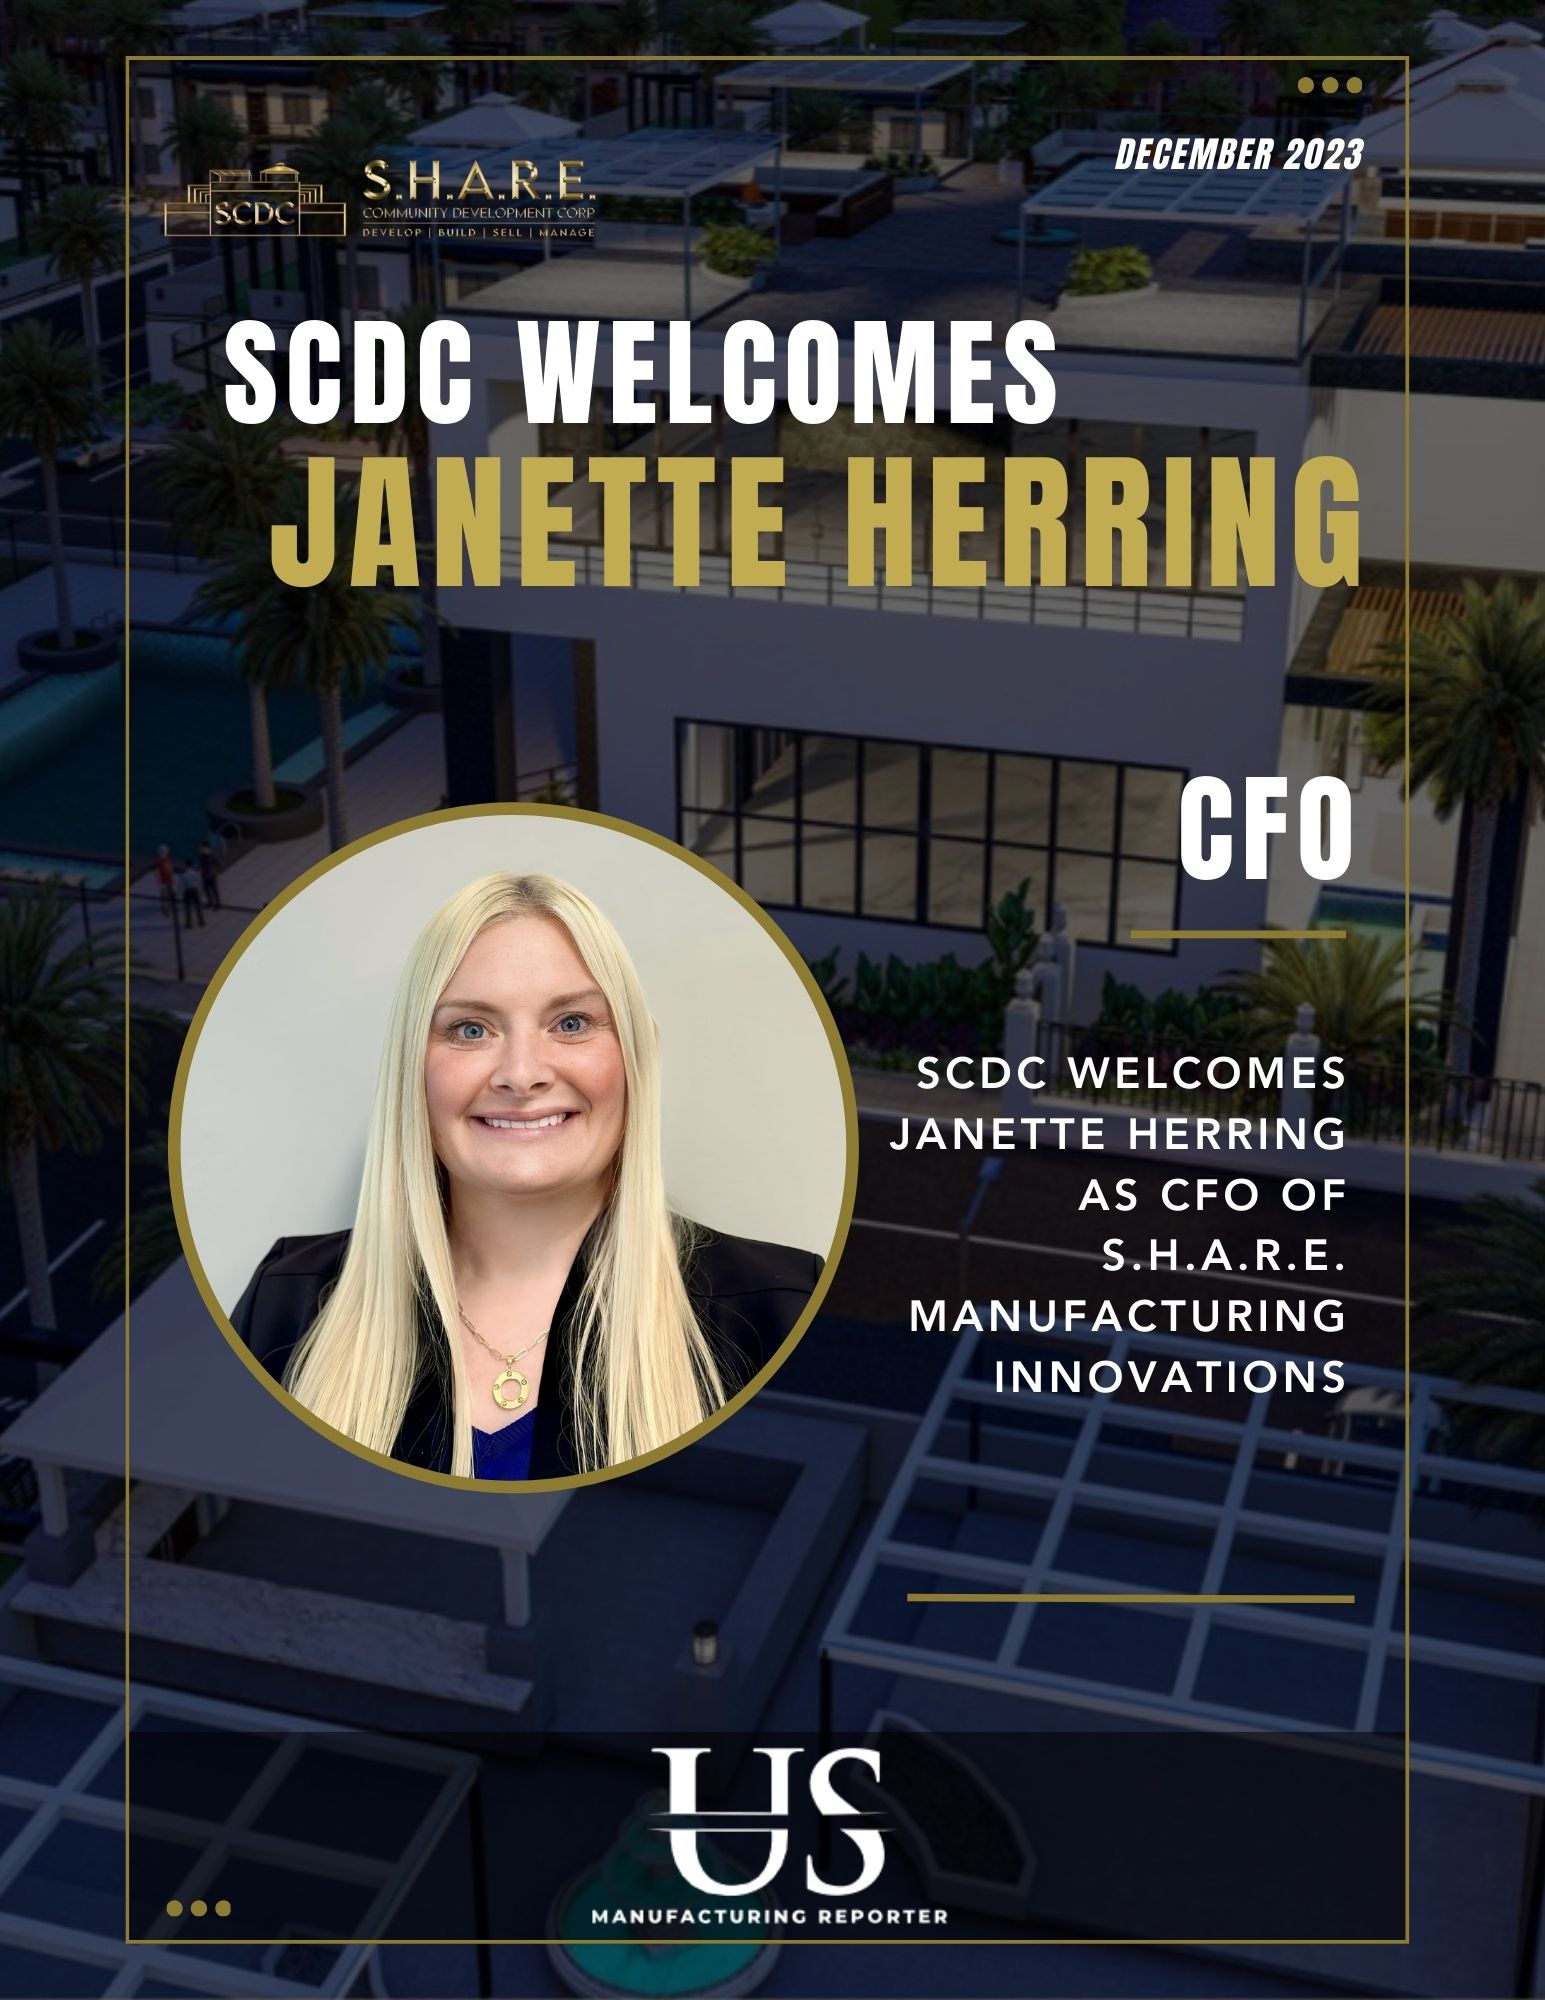 SCDC Introduces Janette Herring as CFO of S.H.A.R.E. Manufacturing Innovations